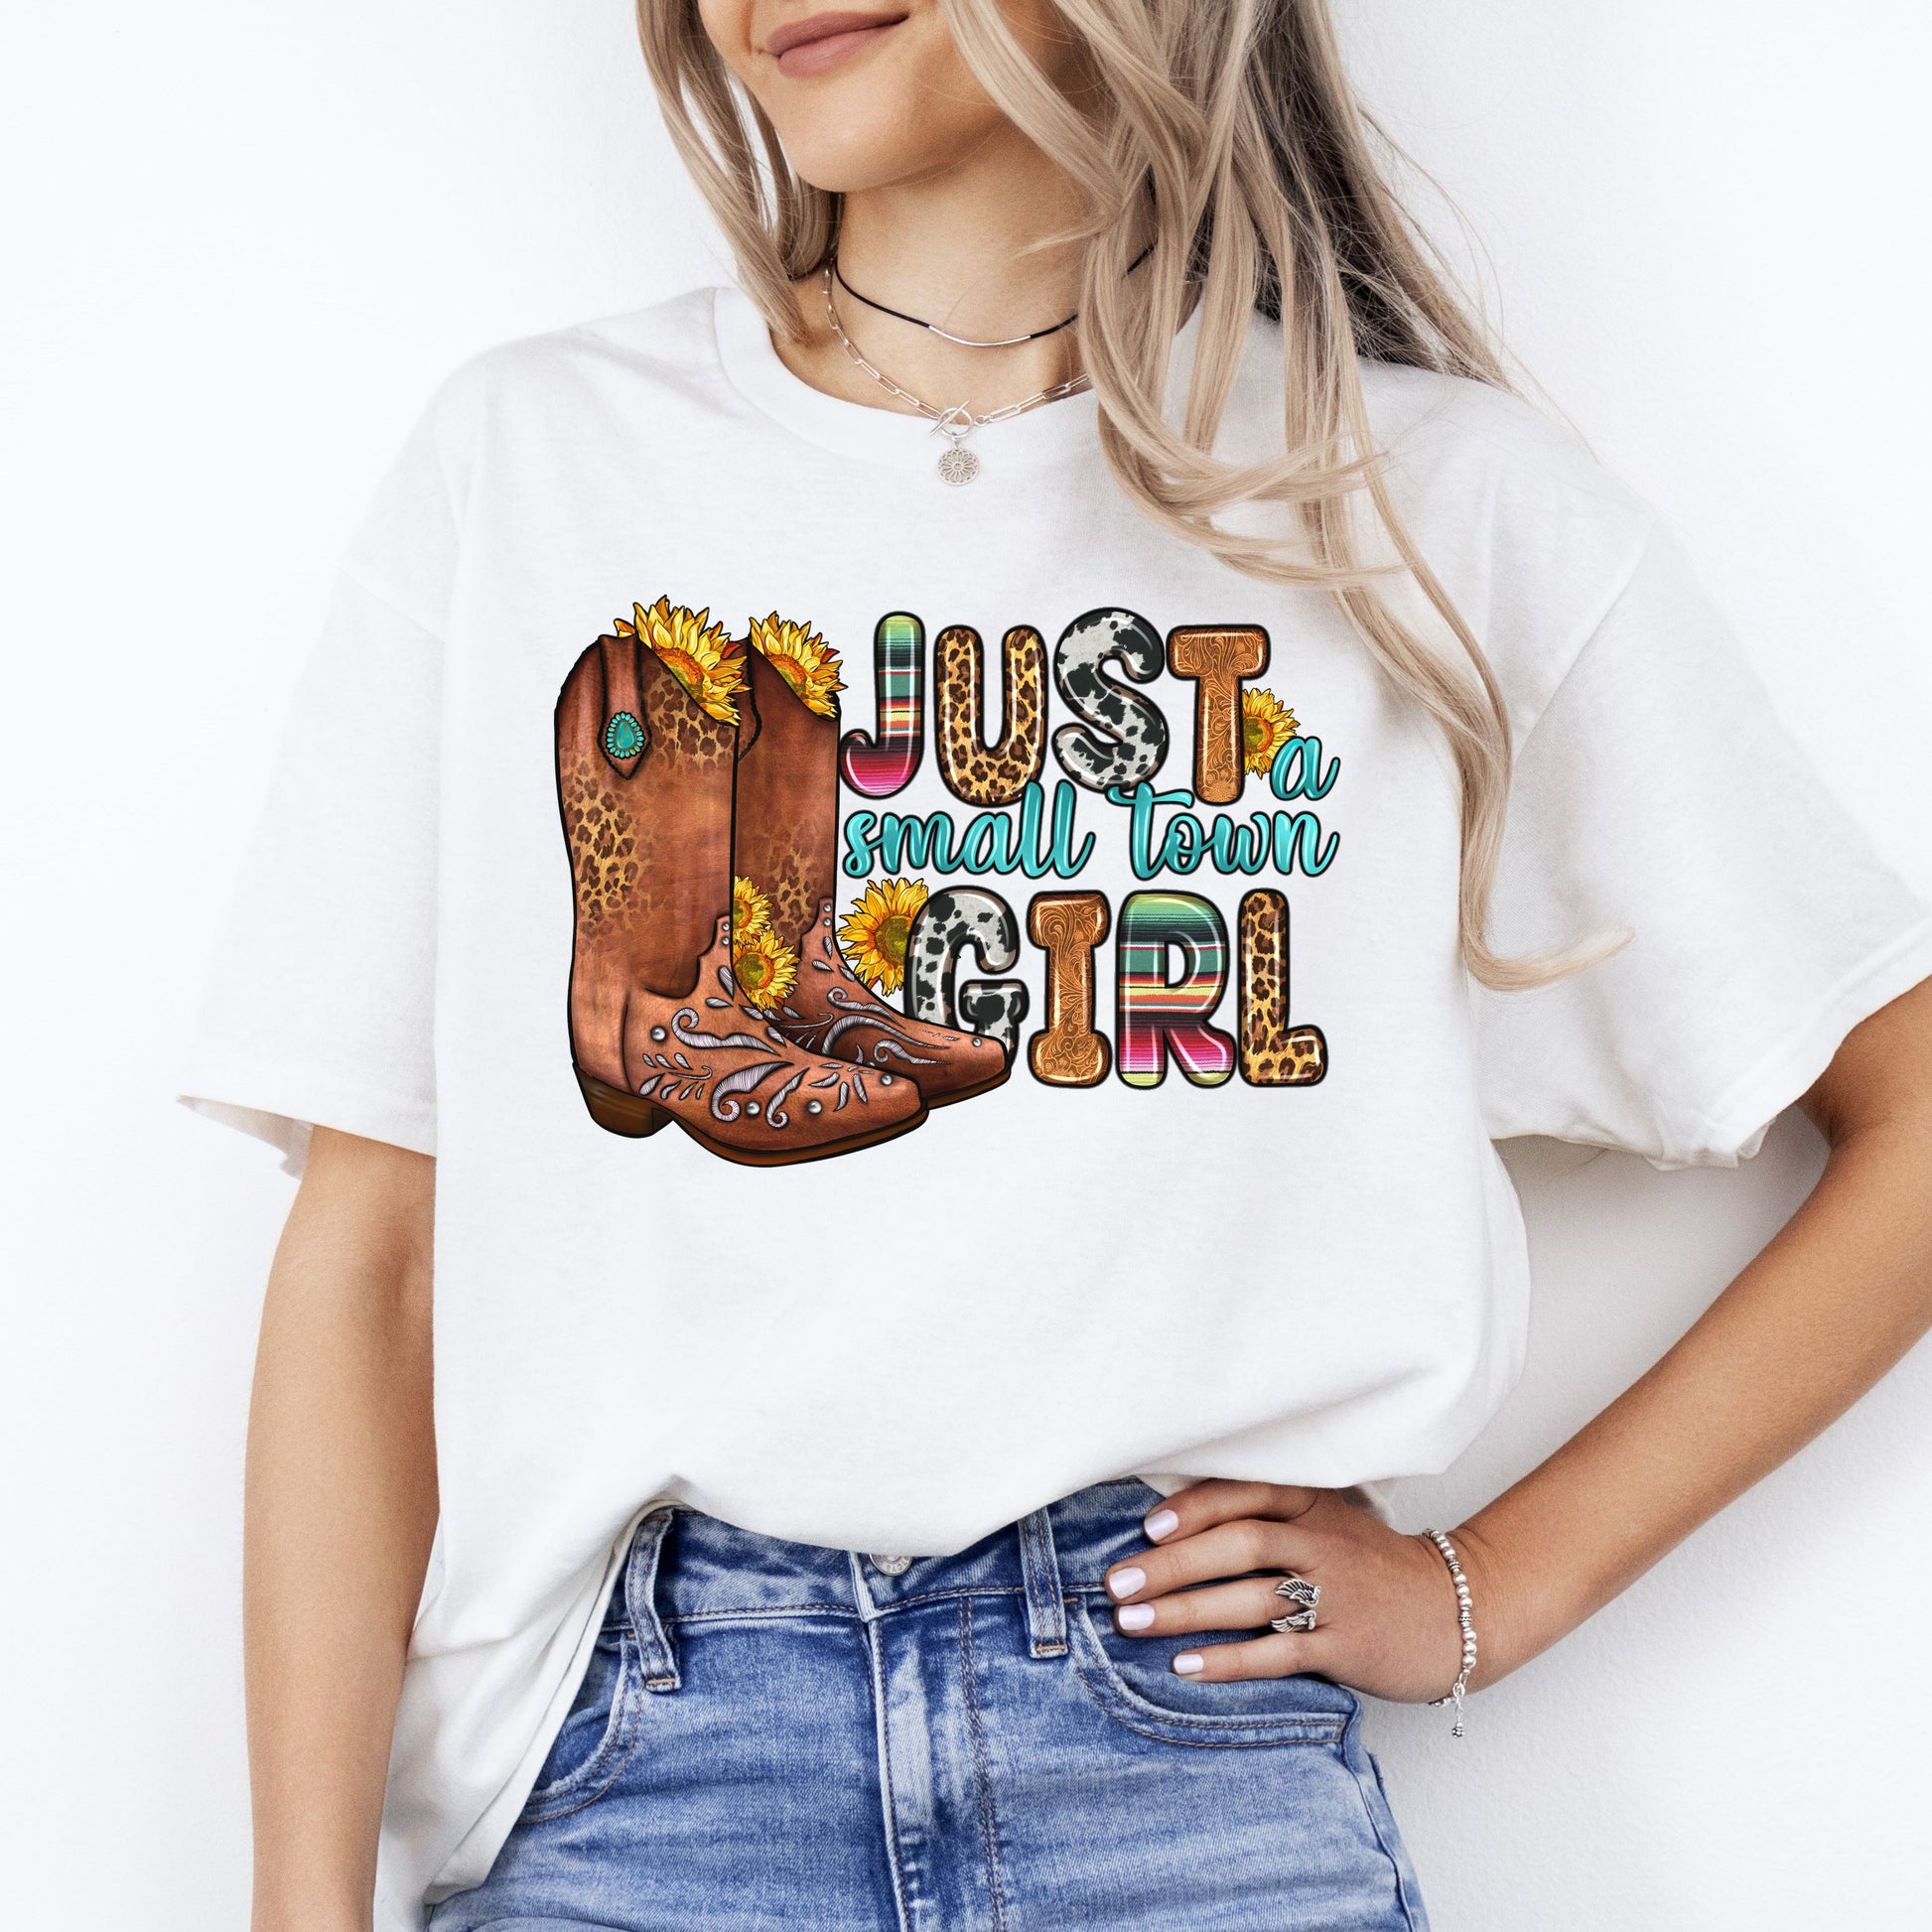 Just a small town girl T-Shirt gift Texas Western girl Unisex tee Sand White Sport Grey-White-Family-Gift-Planet